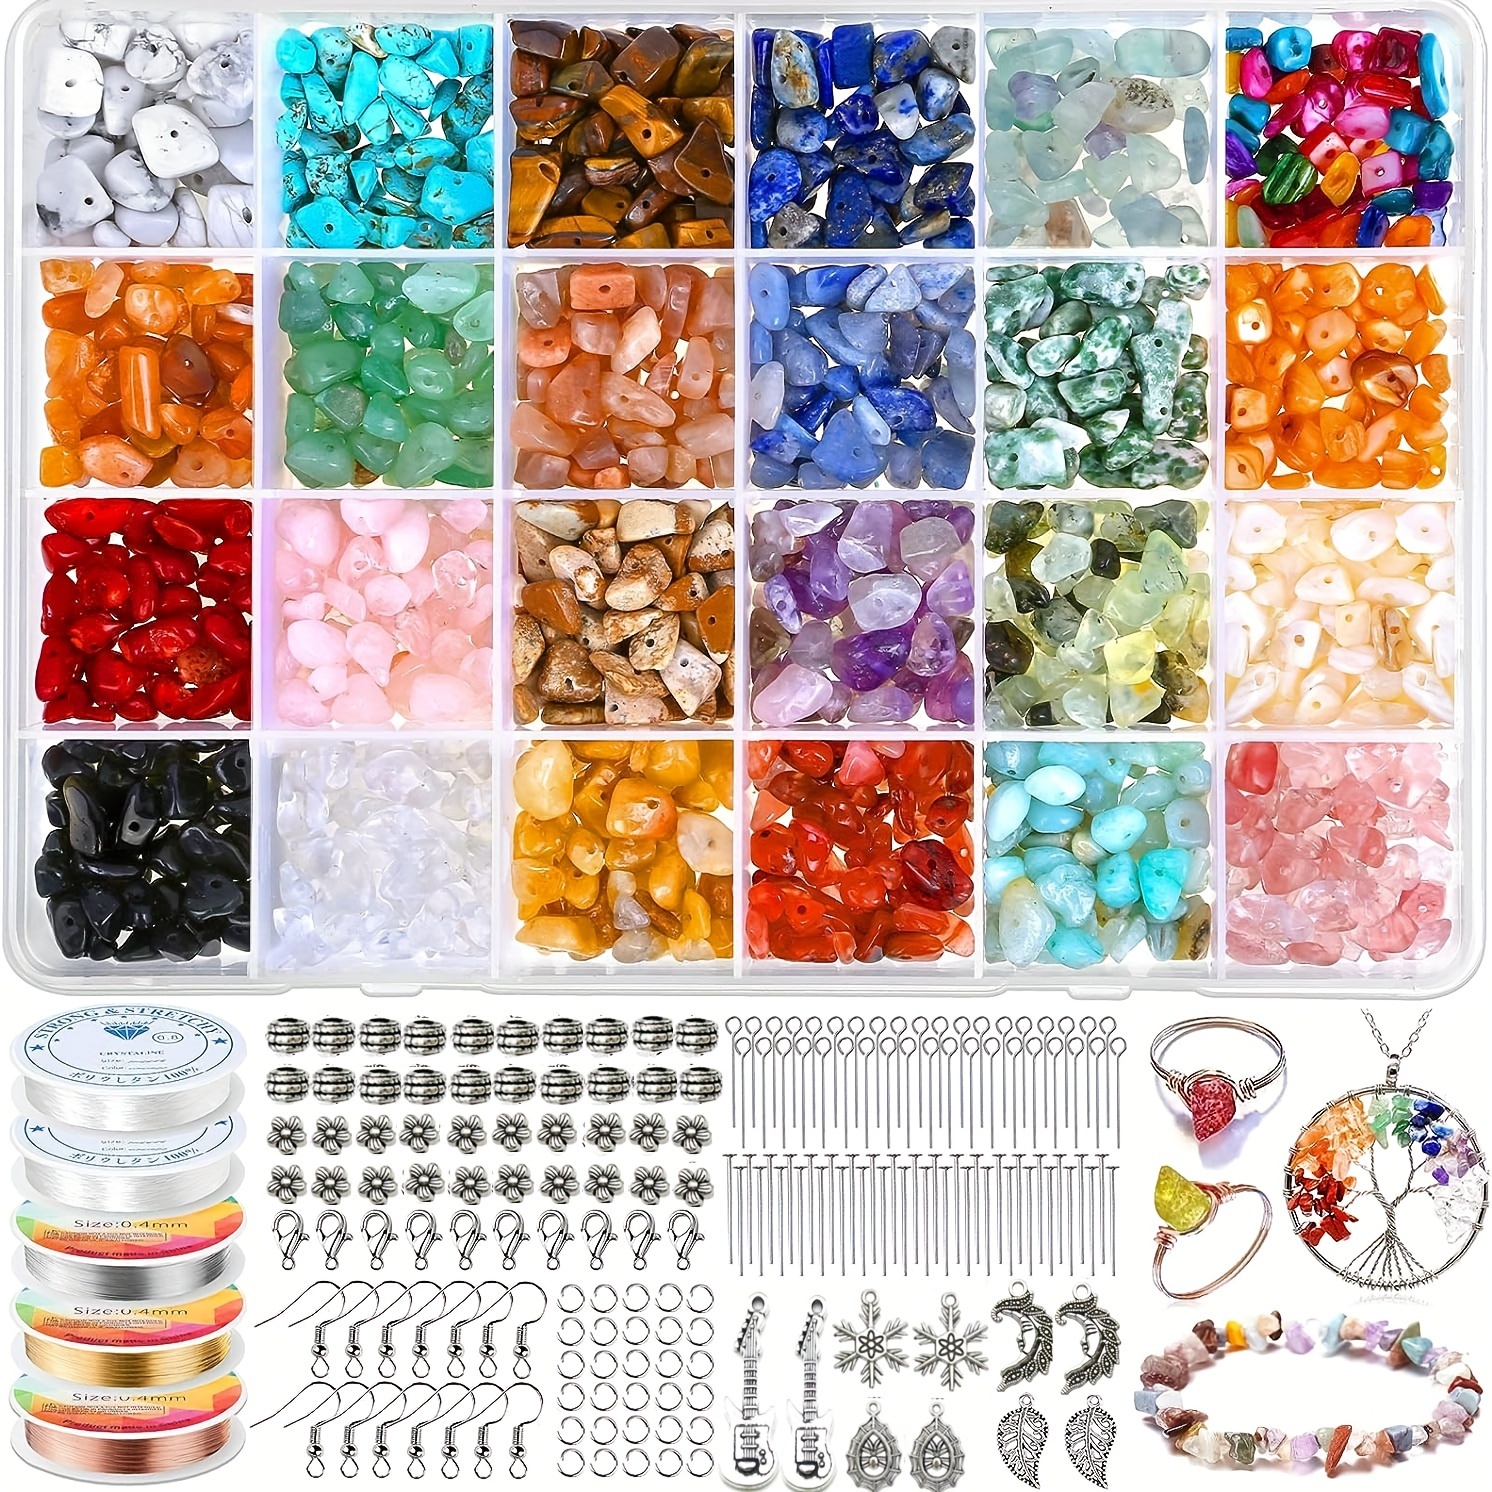 8mm Acrylic Round Glass Beads For Jewelry Making, 24 Color DIY Gemstone  Crystal Beads Bracelet Making Kit, Loose Beads Spacers For Friendship  Bracelet